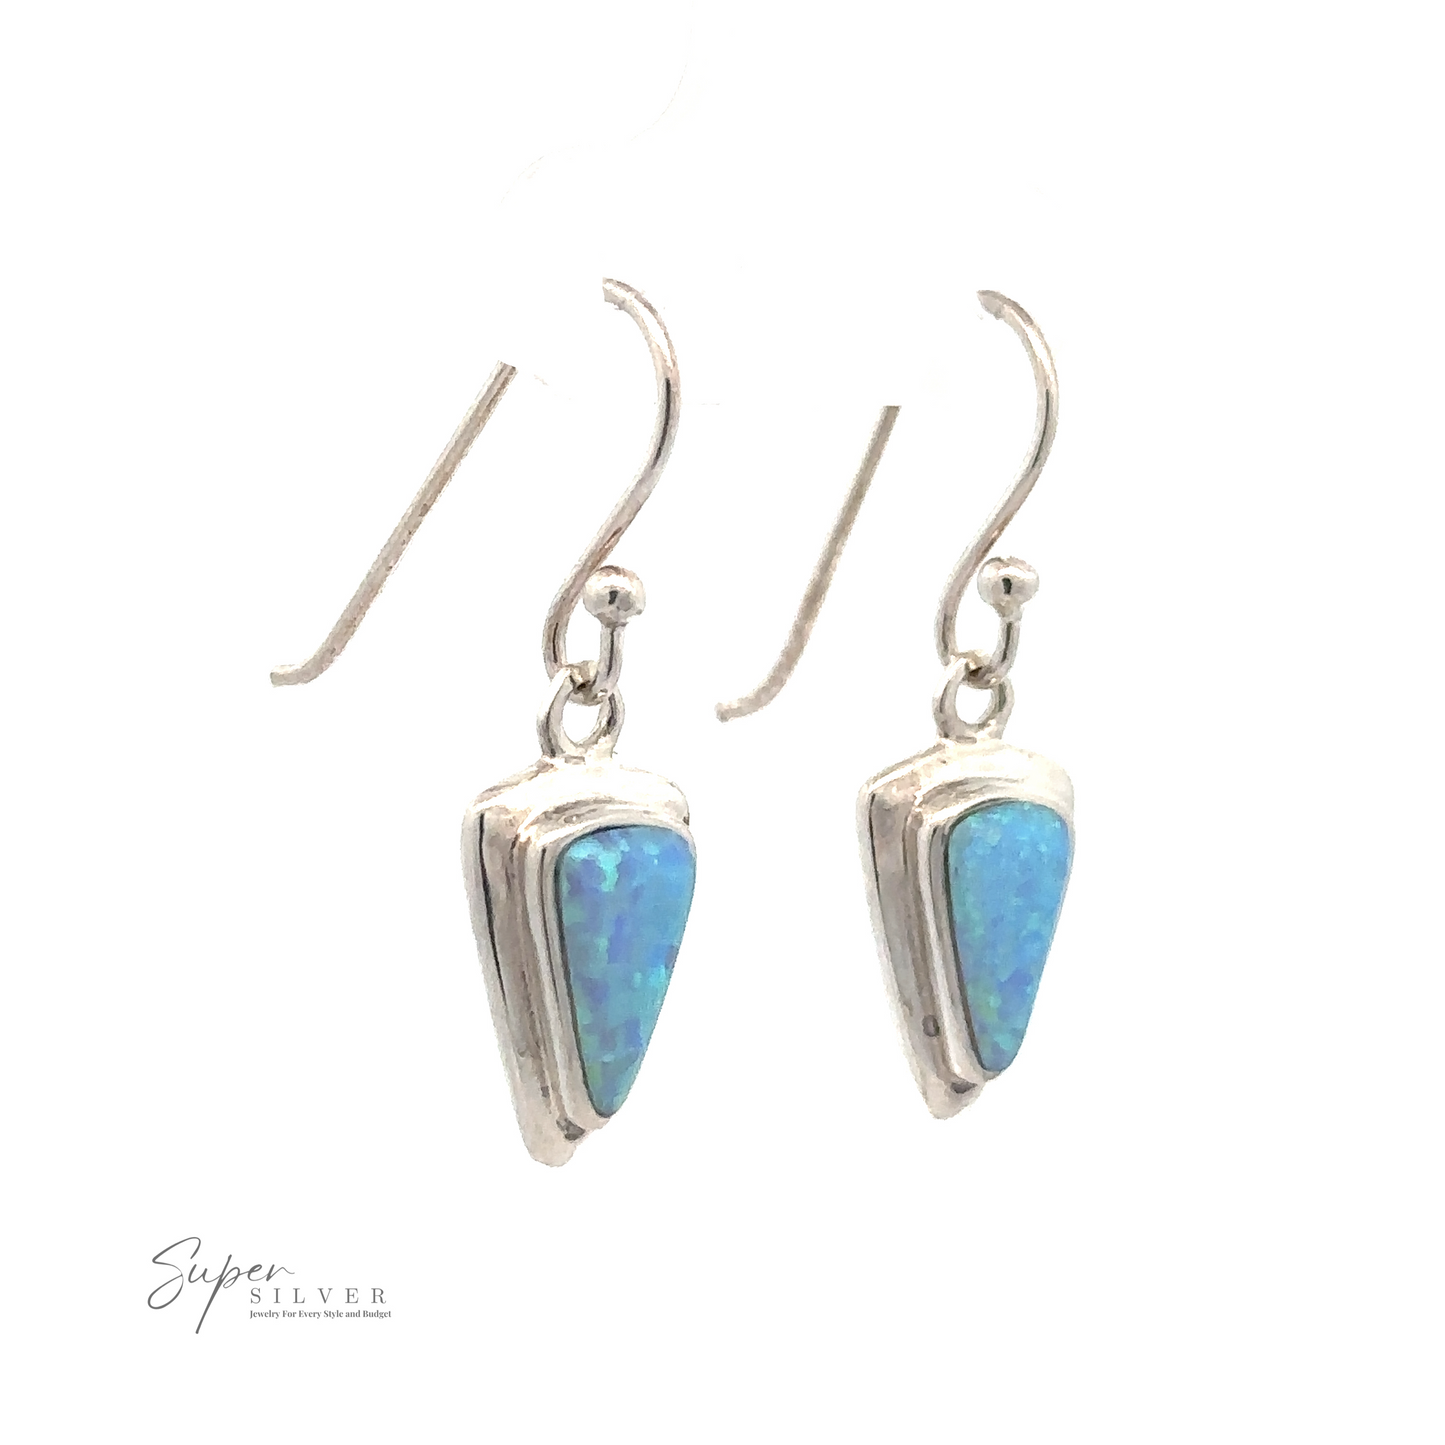 Silver hook earrings with blue triangular stones. These elegant Blue Created Opal Triangle Earrings feature the "Super Silver" logo in the bottom corner.